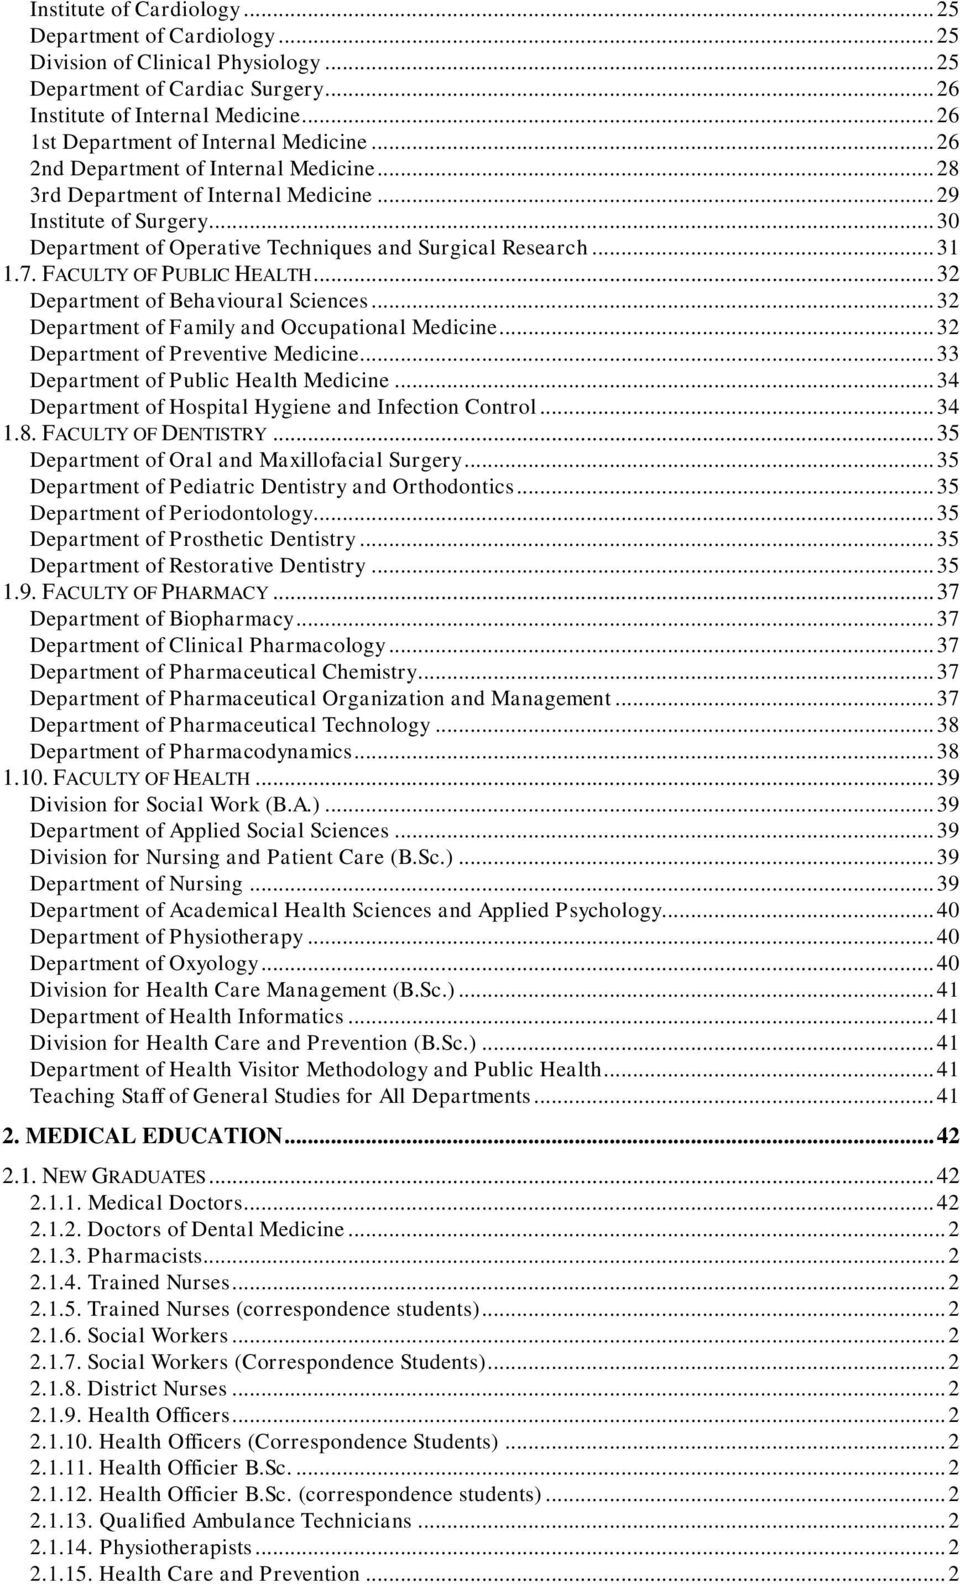 .. 30 Department of Operative Techniques and Surgical Research... 31 1.7. FACULTY OF PUBLIC HEALTH... 32 Department of Behavioural Sciences... 32 Department of Family and Occupational Medicine.